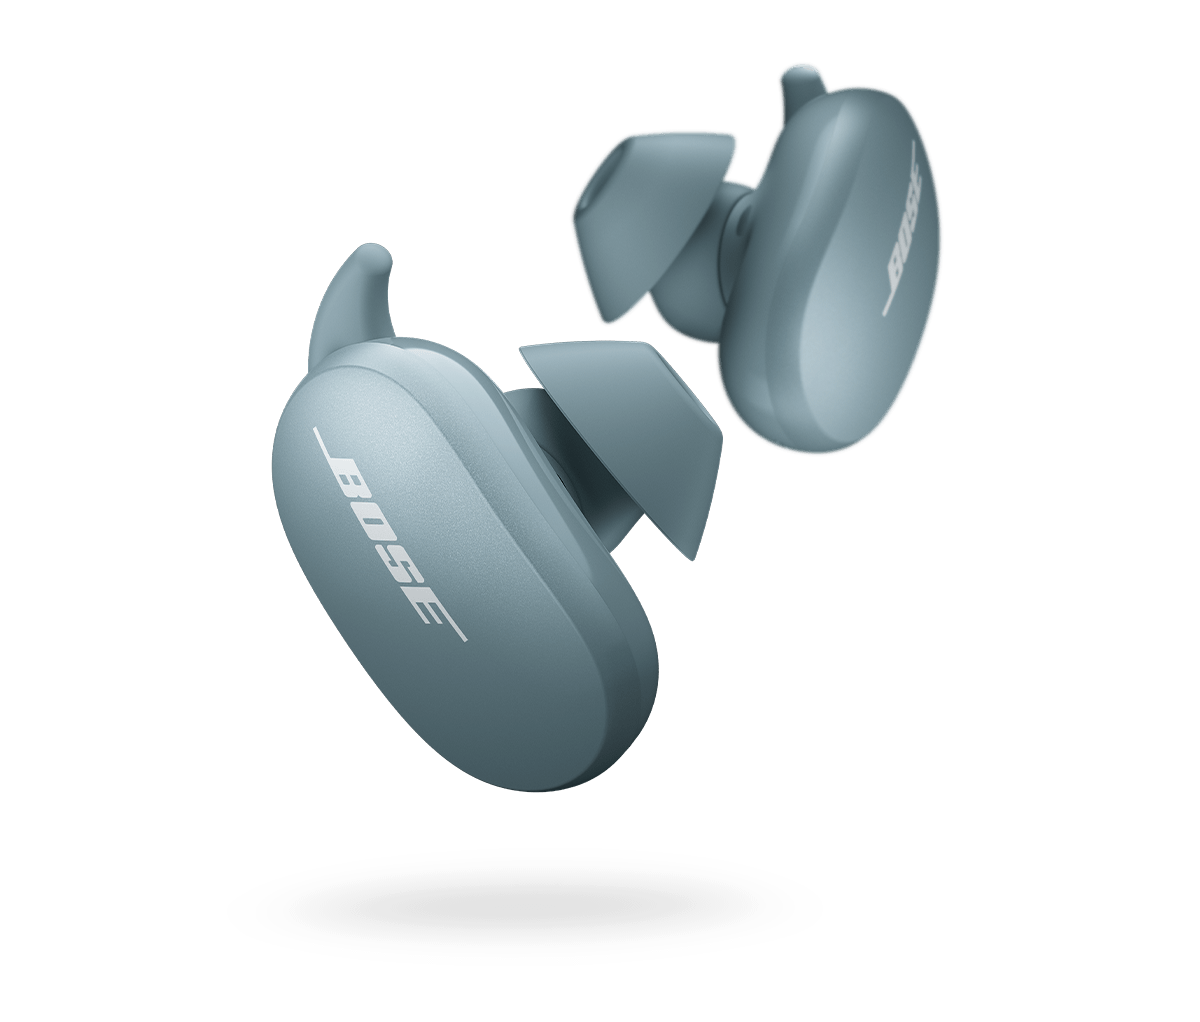 BOSE - BOSE quiet comfort earbuds 2 イヤホン イヤフォンの+stbp.com.br